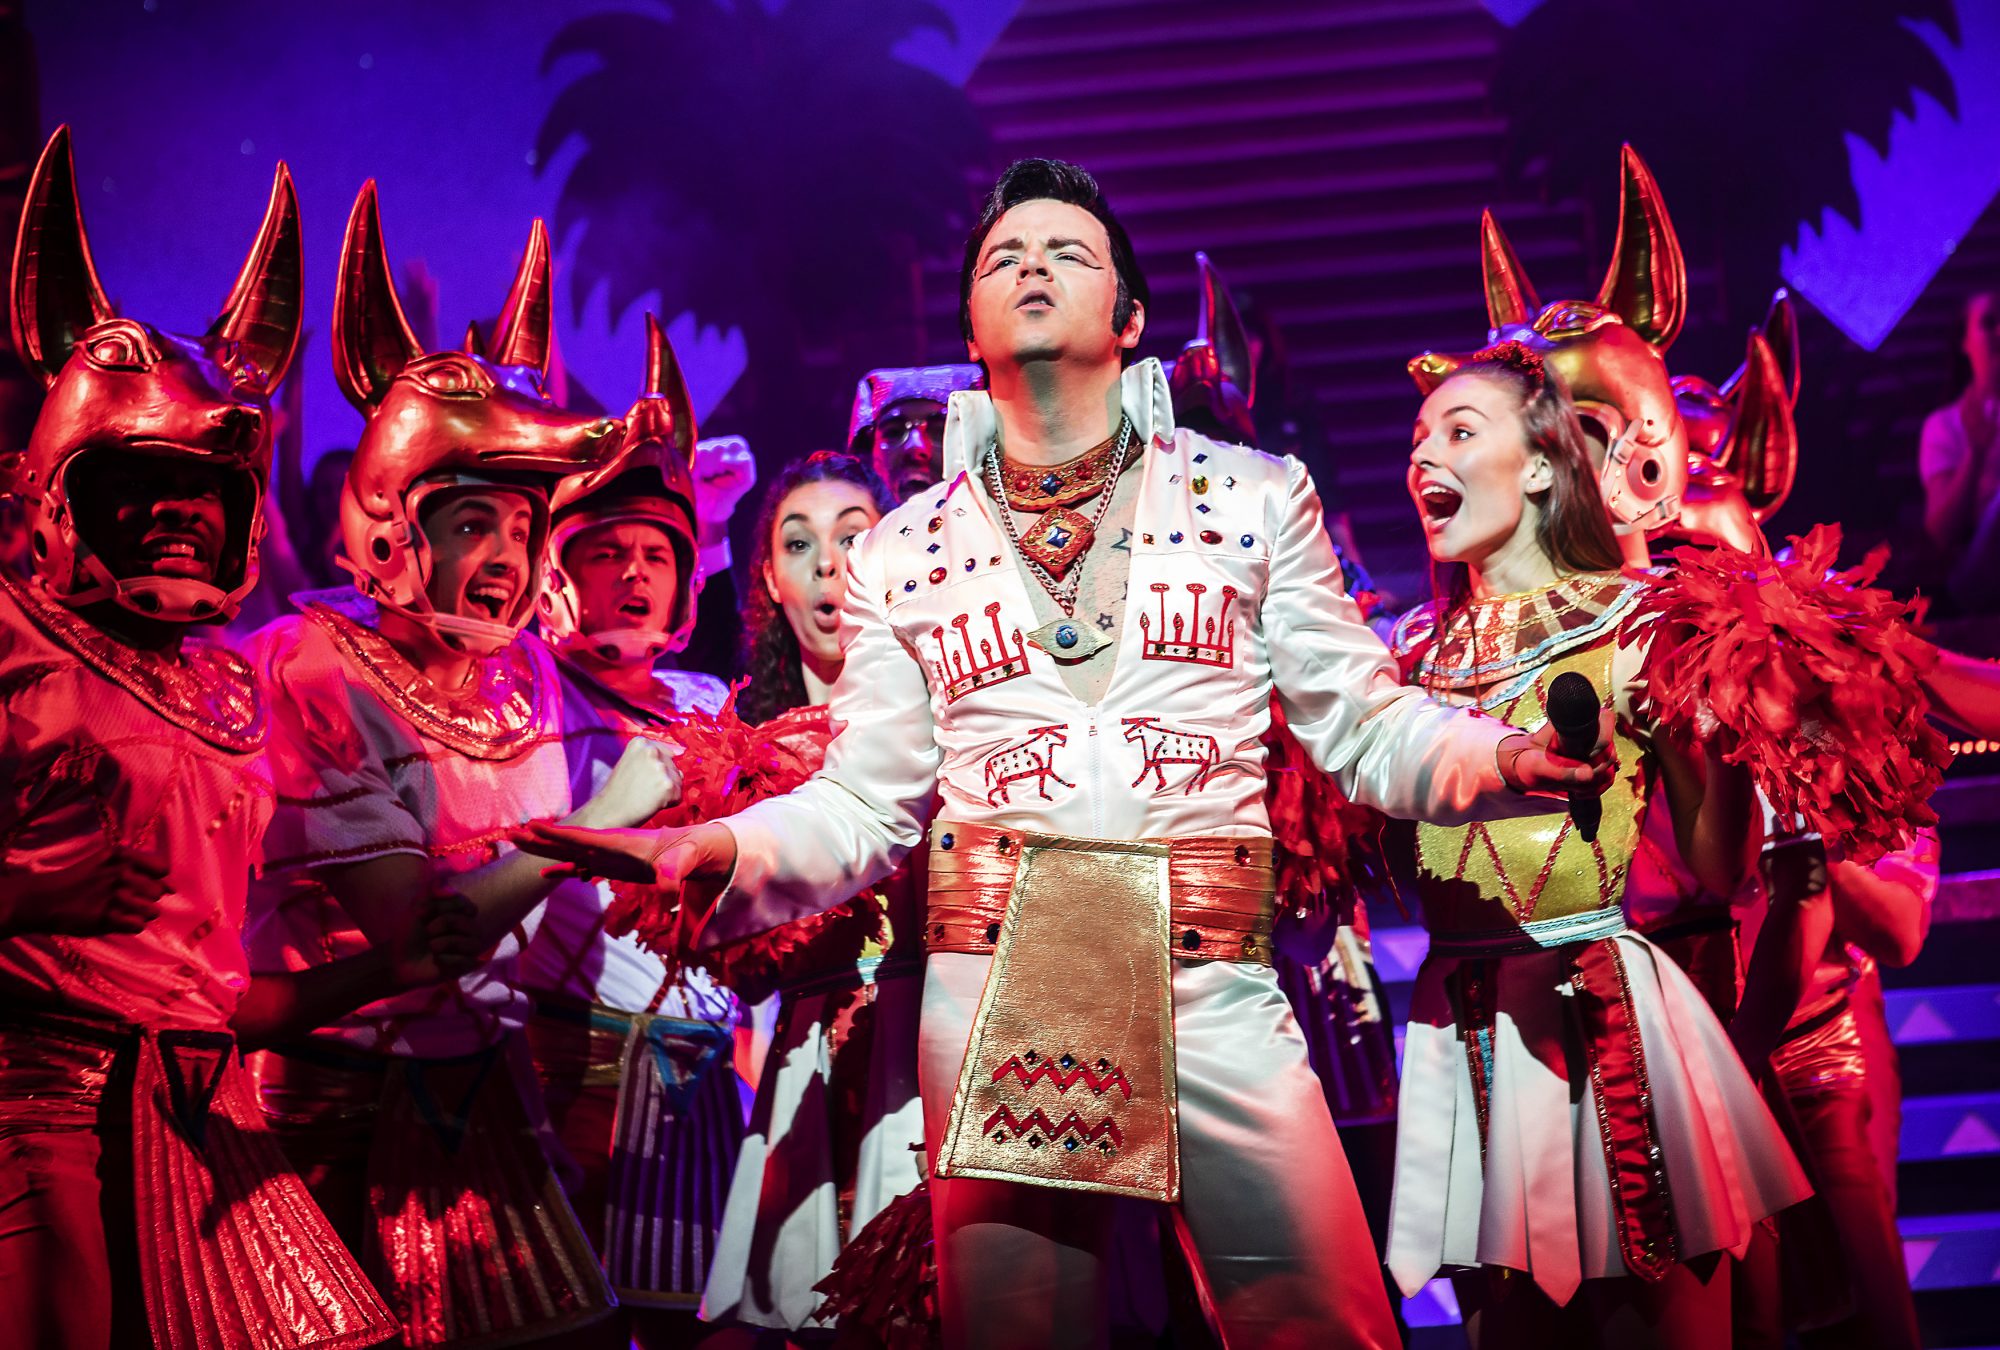 Review 'Joseph and the Amazing Technicolor Dreamcoat'